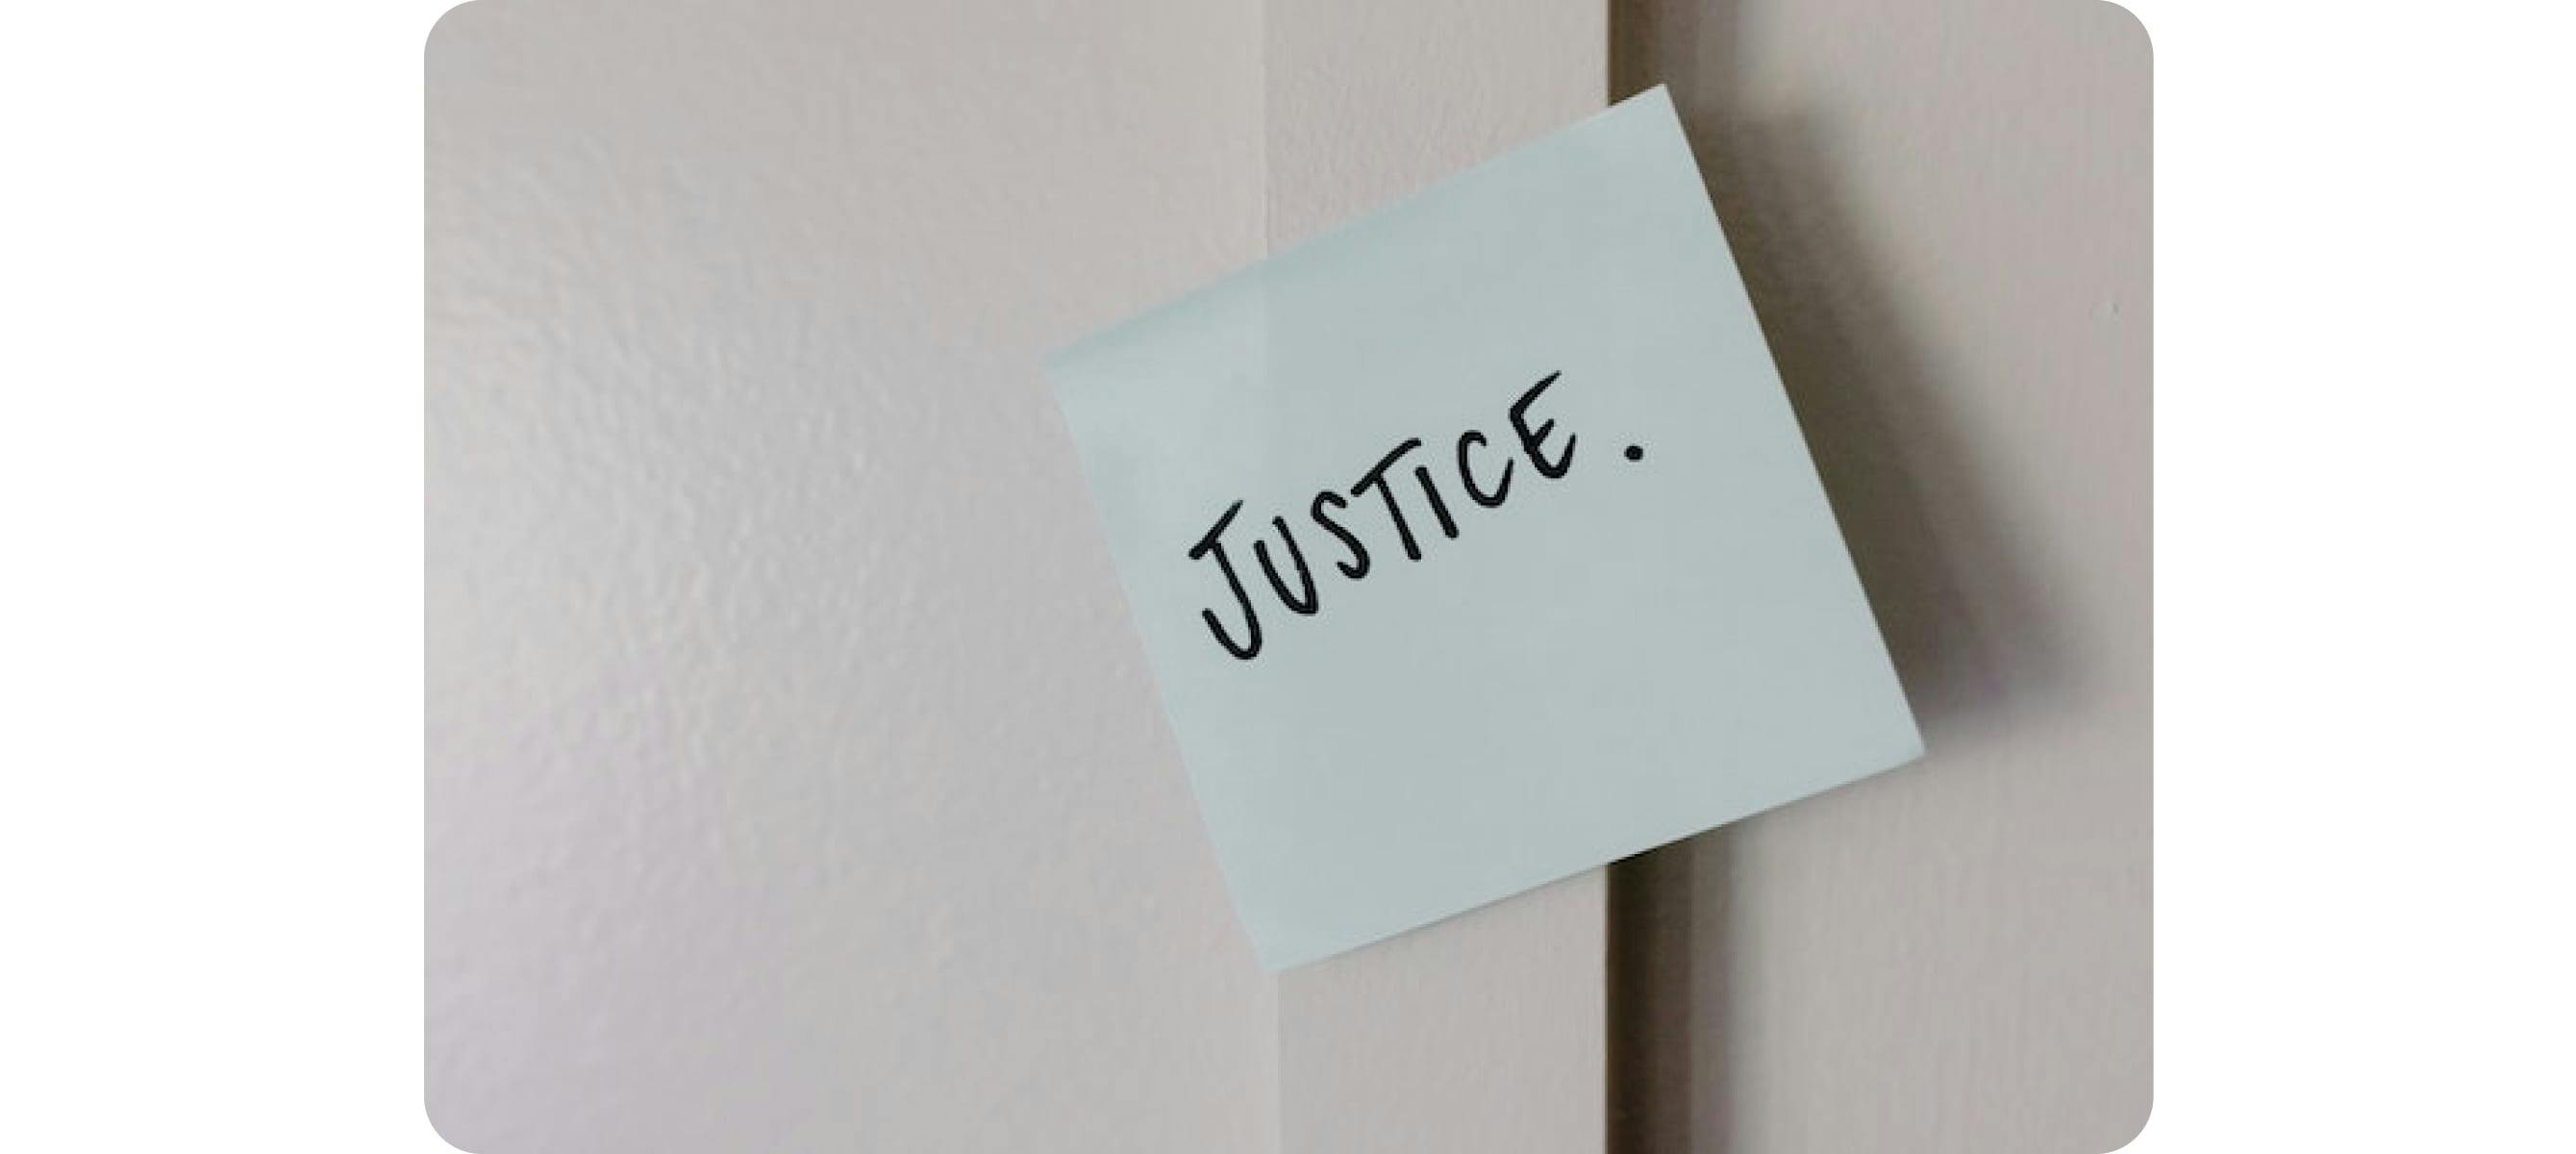 a paper on the wall with the word justice